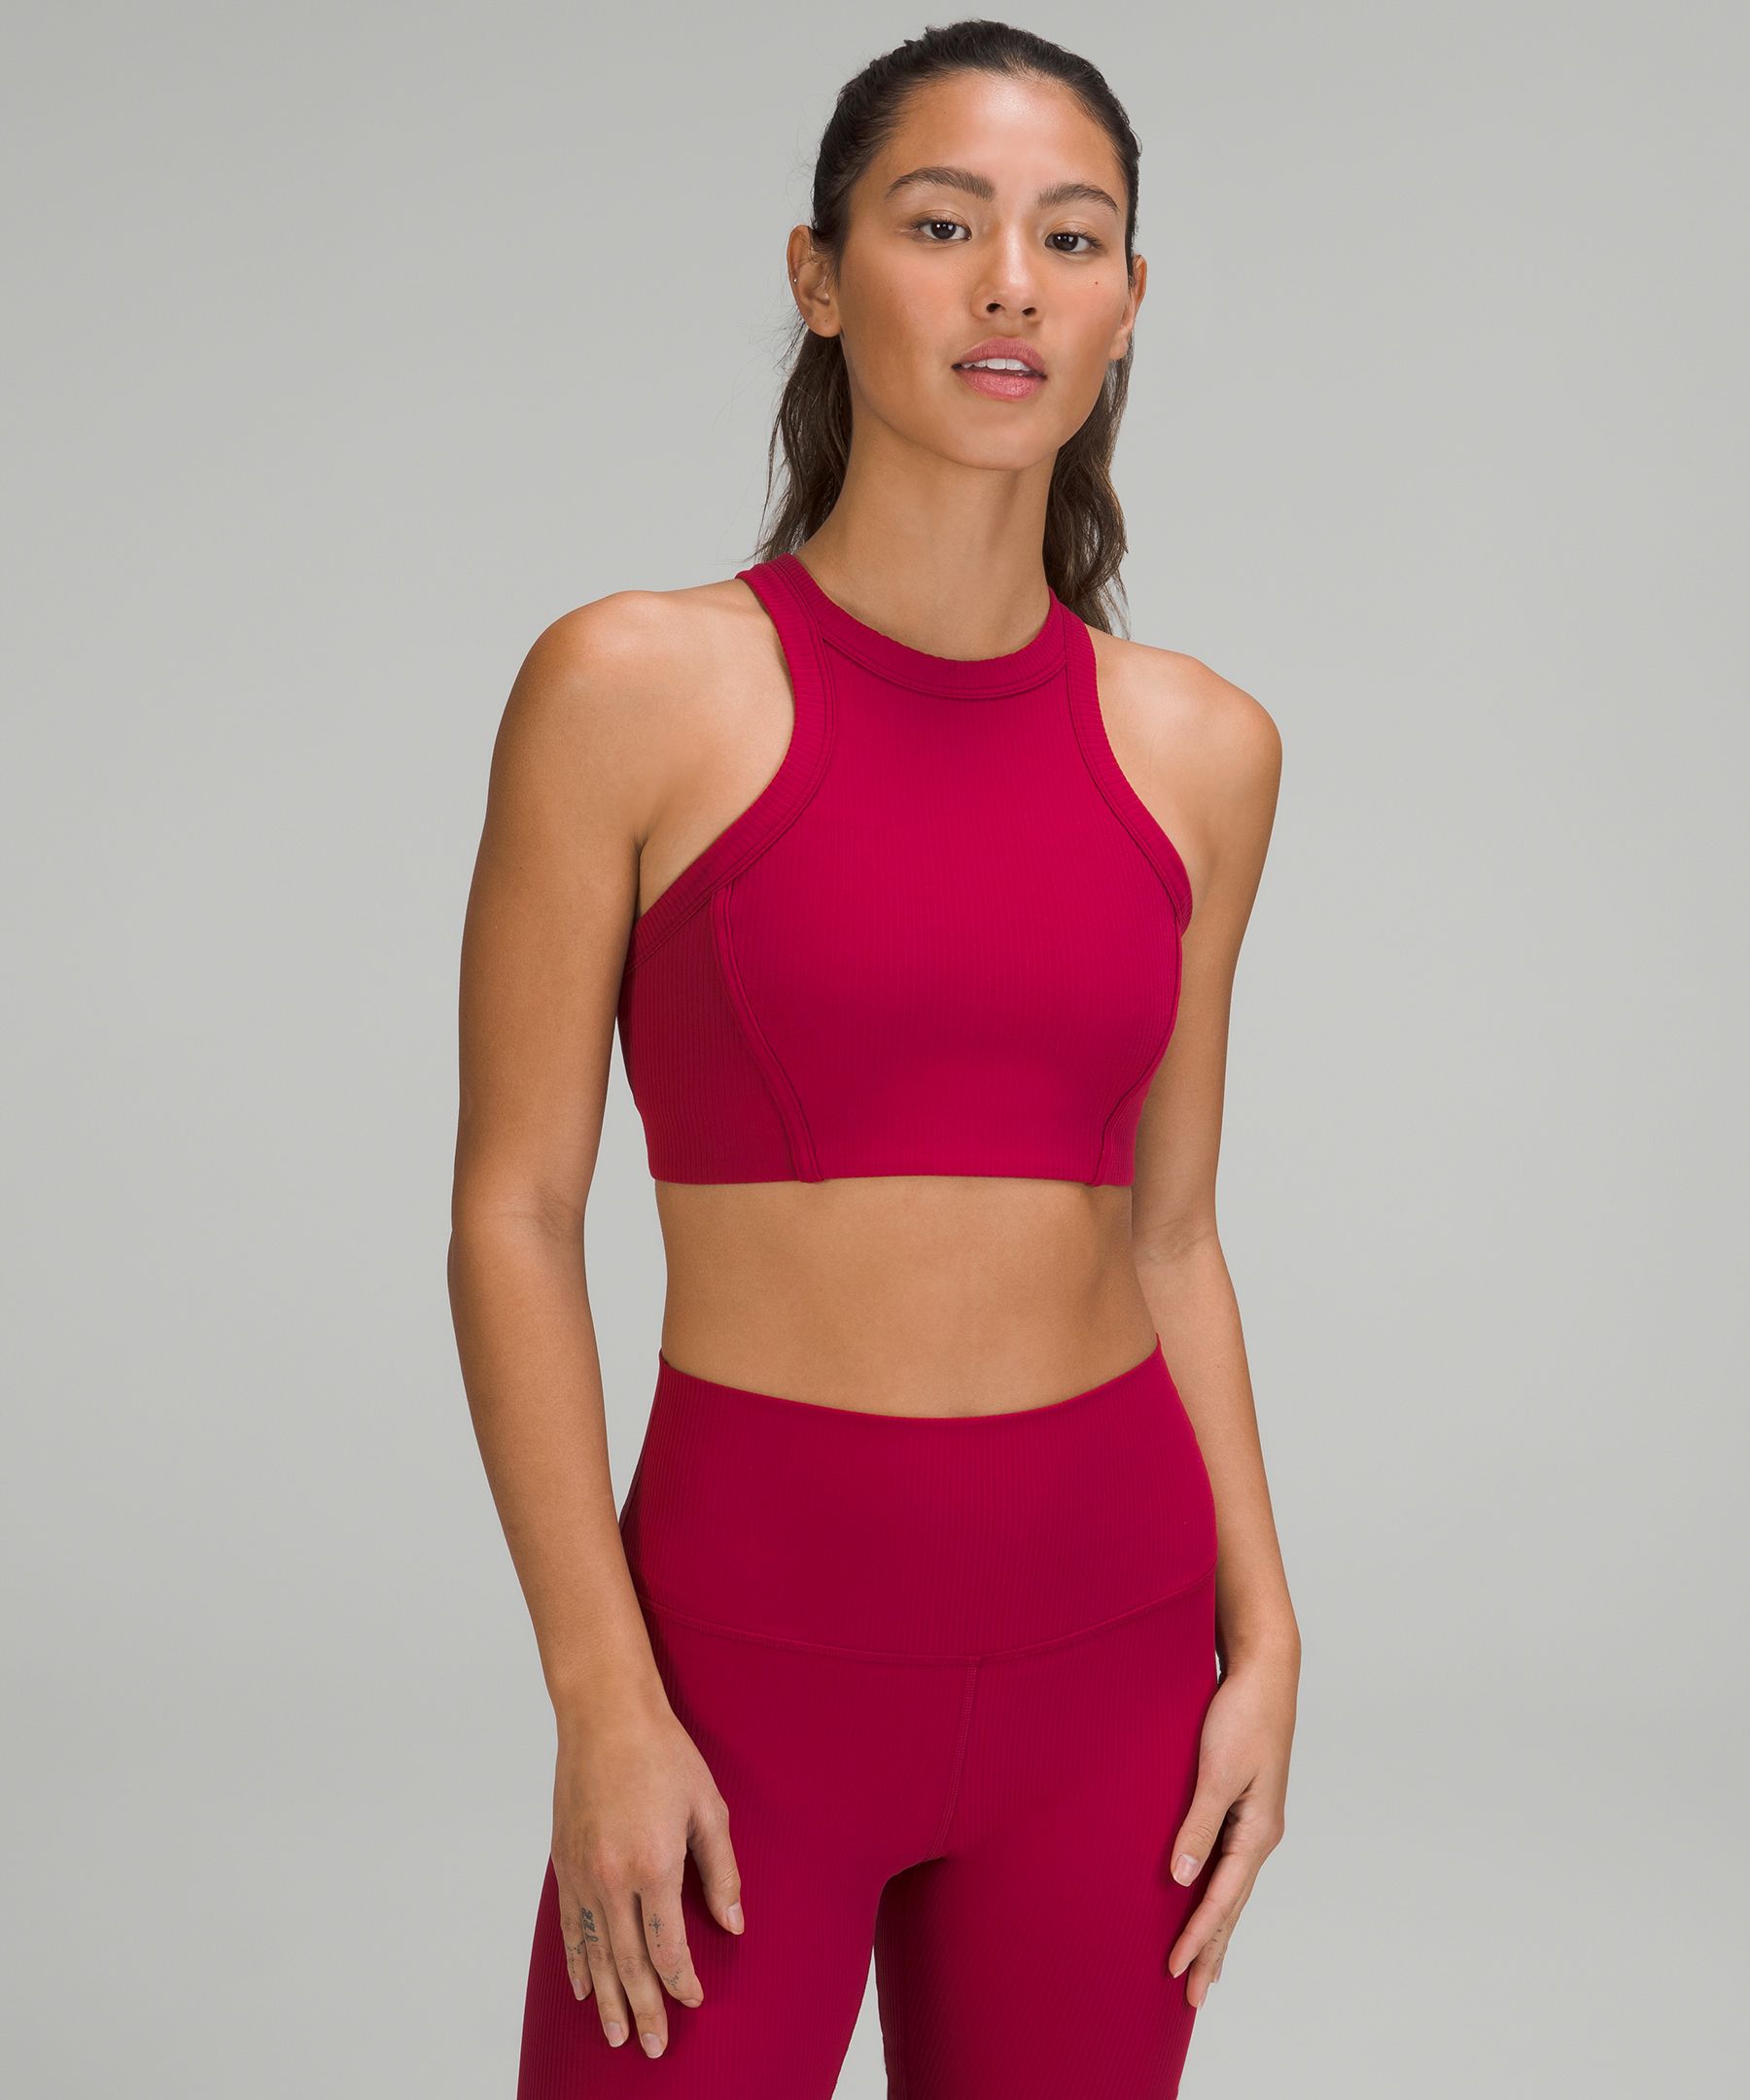 Lululemon Ribbed Nulu High-Neck Yoga Bra Brown - $66 New With Tags